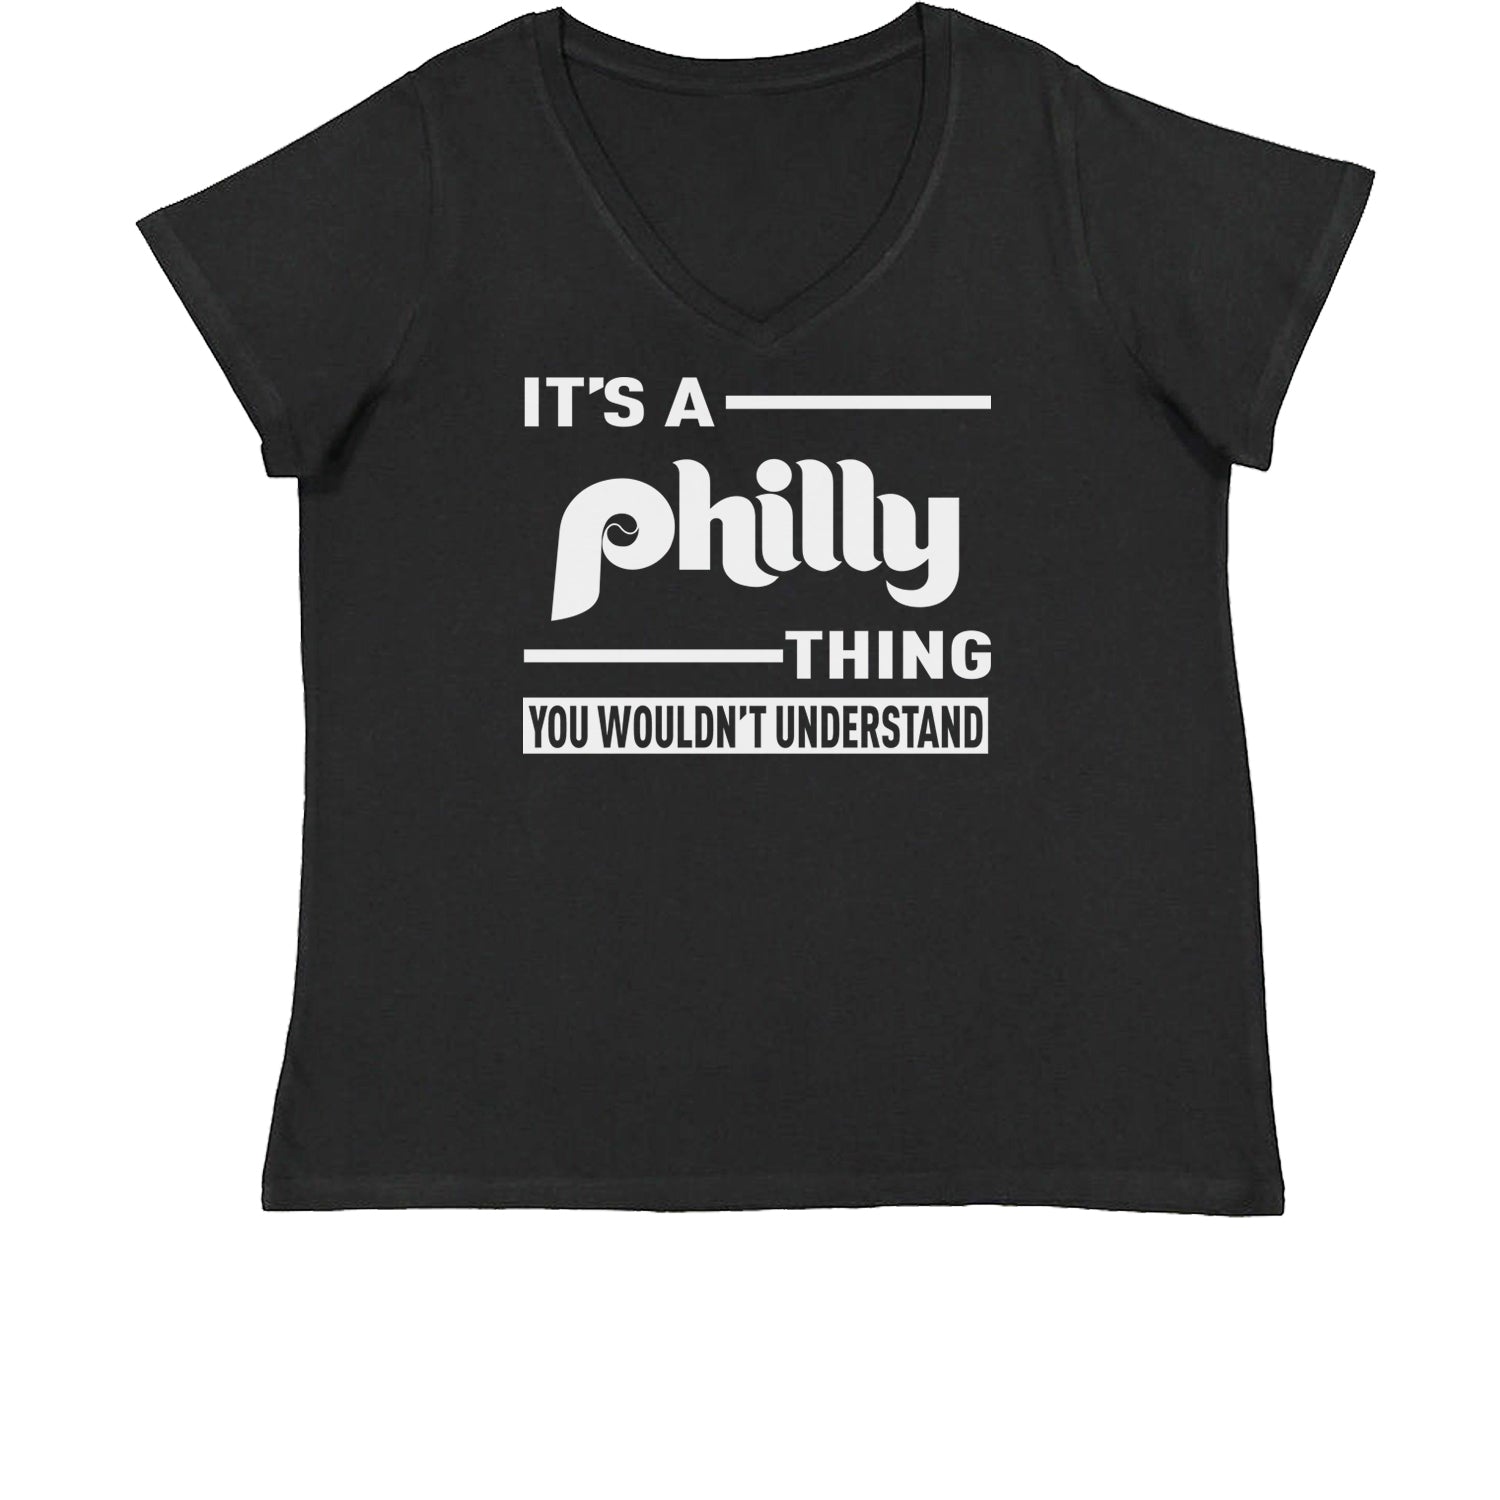 It's A Philly Thing, You Wouldn't Understand Womens Plus Size V-Neck T-shirt baseball, filly, football, jawn, morgan, Philadelphia, philli by Expression Tees